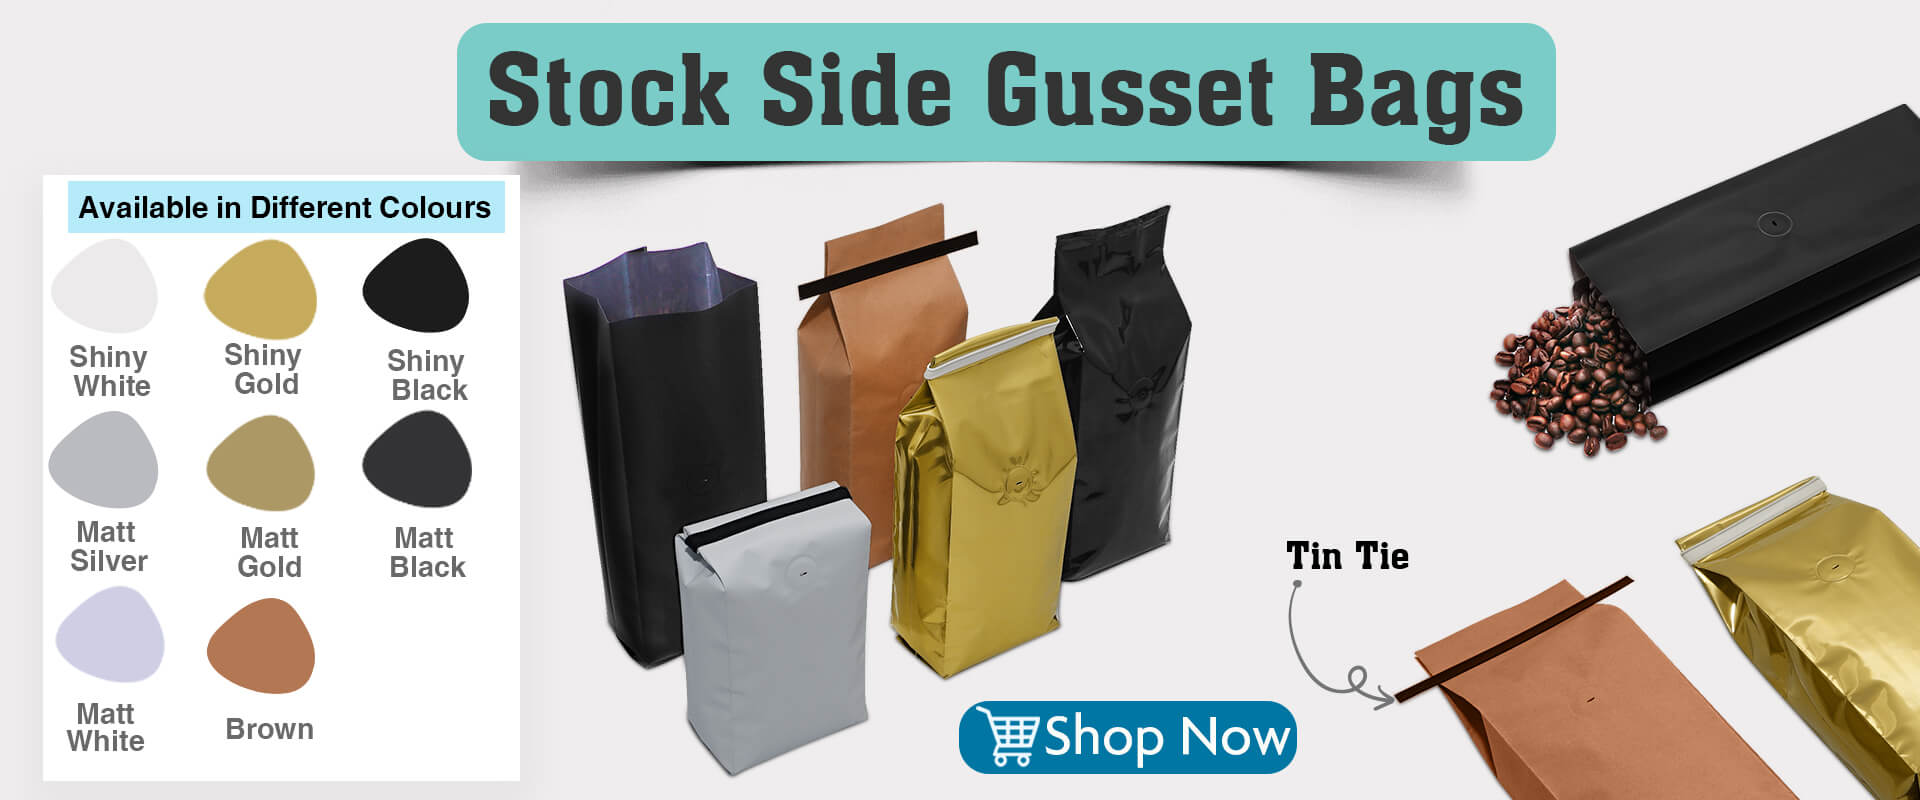 Size Gusset Bags